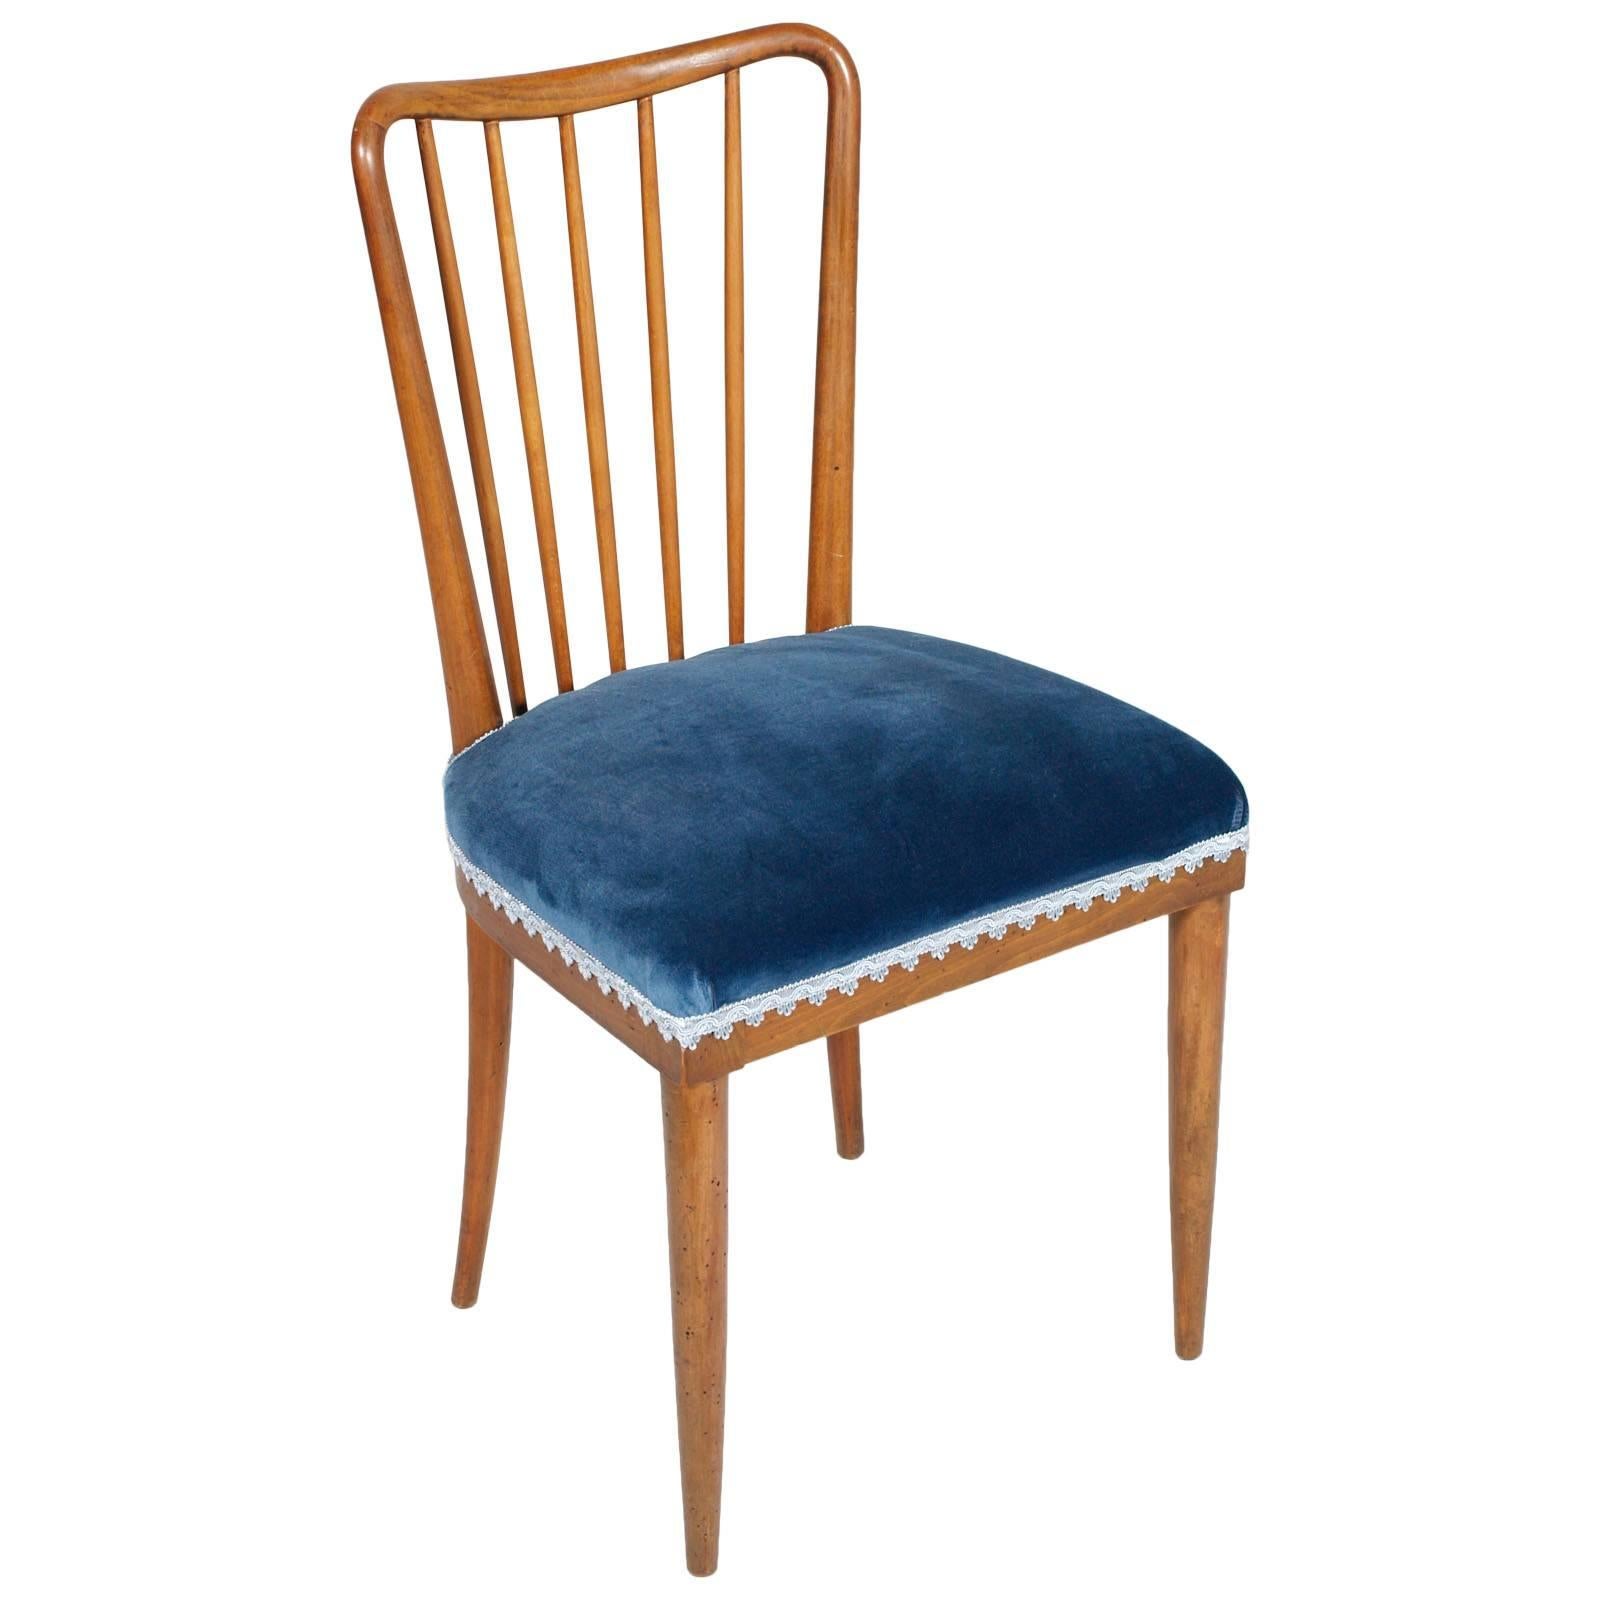 Mid-Century Modern 1950s Paolo Buffa side chairs in blond walnut, restored with new upholstery in blue velvet as in the original.

Measures in cm: H 48/92, W 50, D 47.